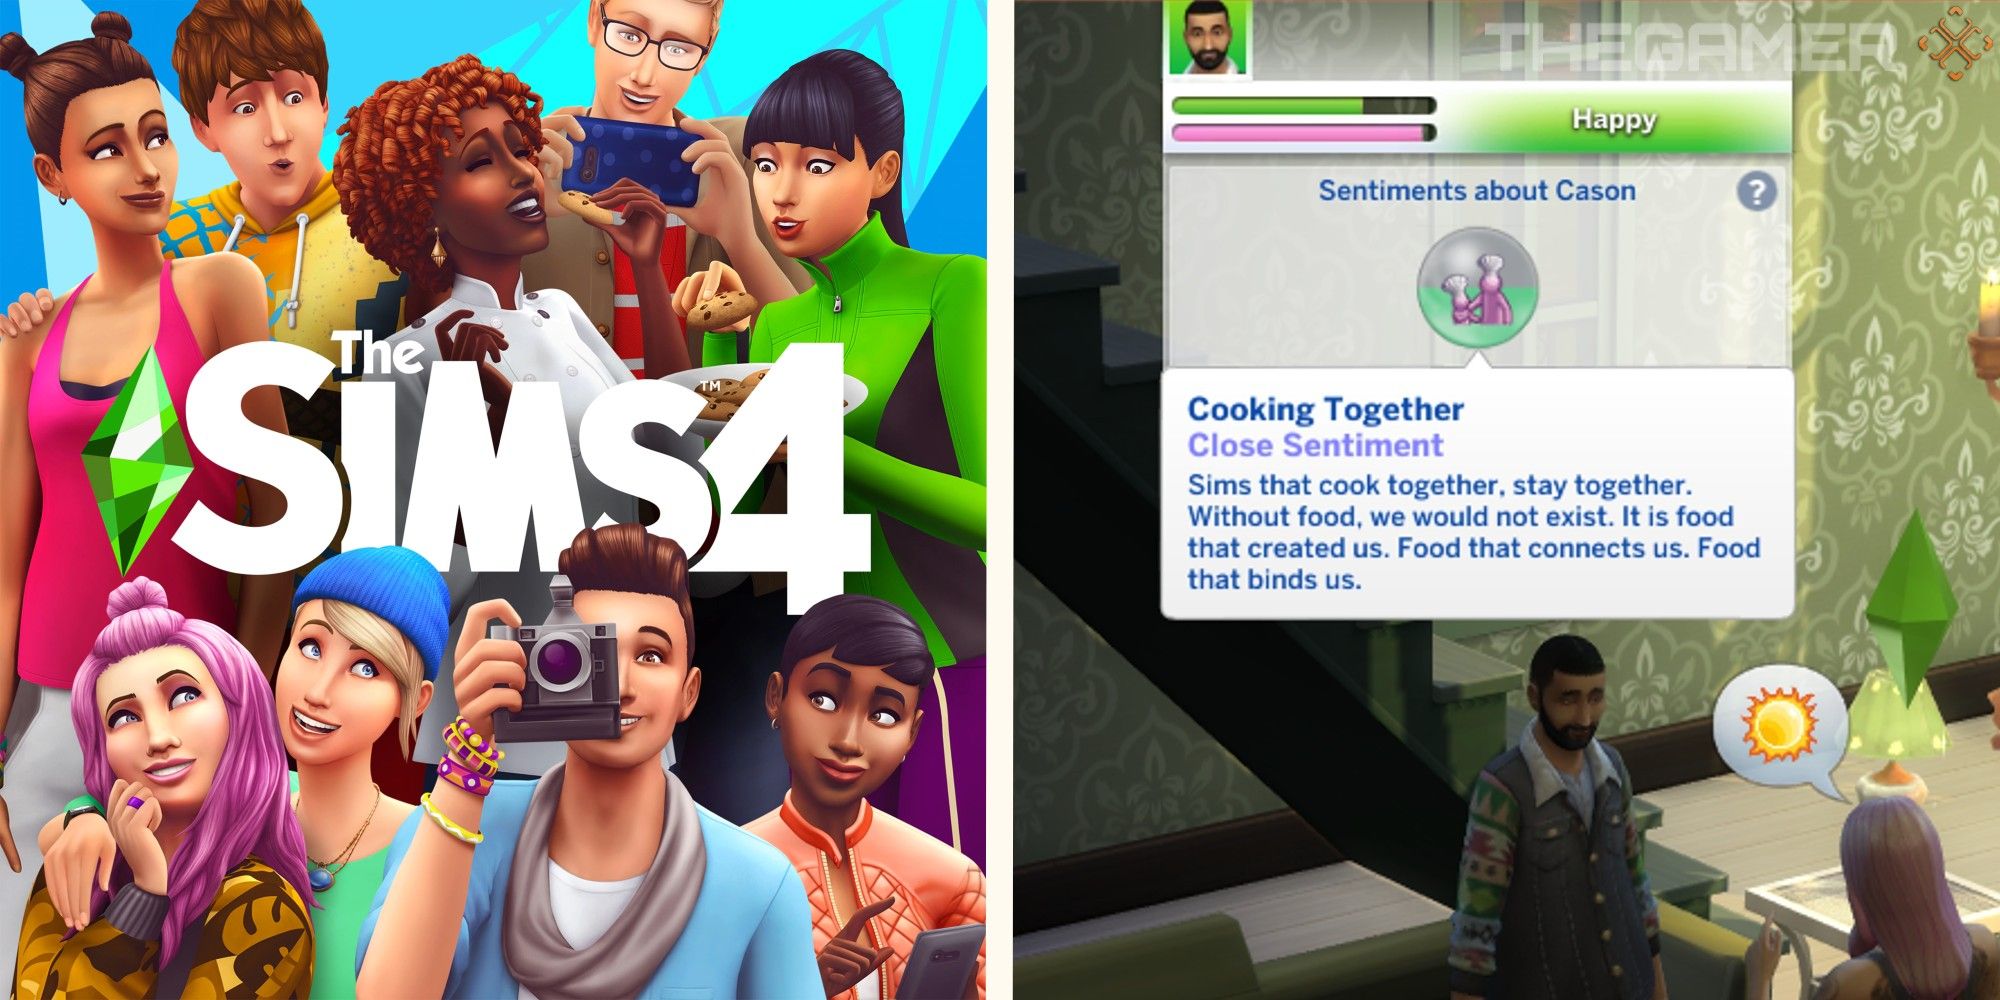 sims 4 no jealousy mod not working